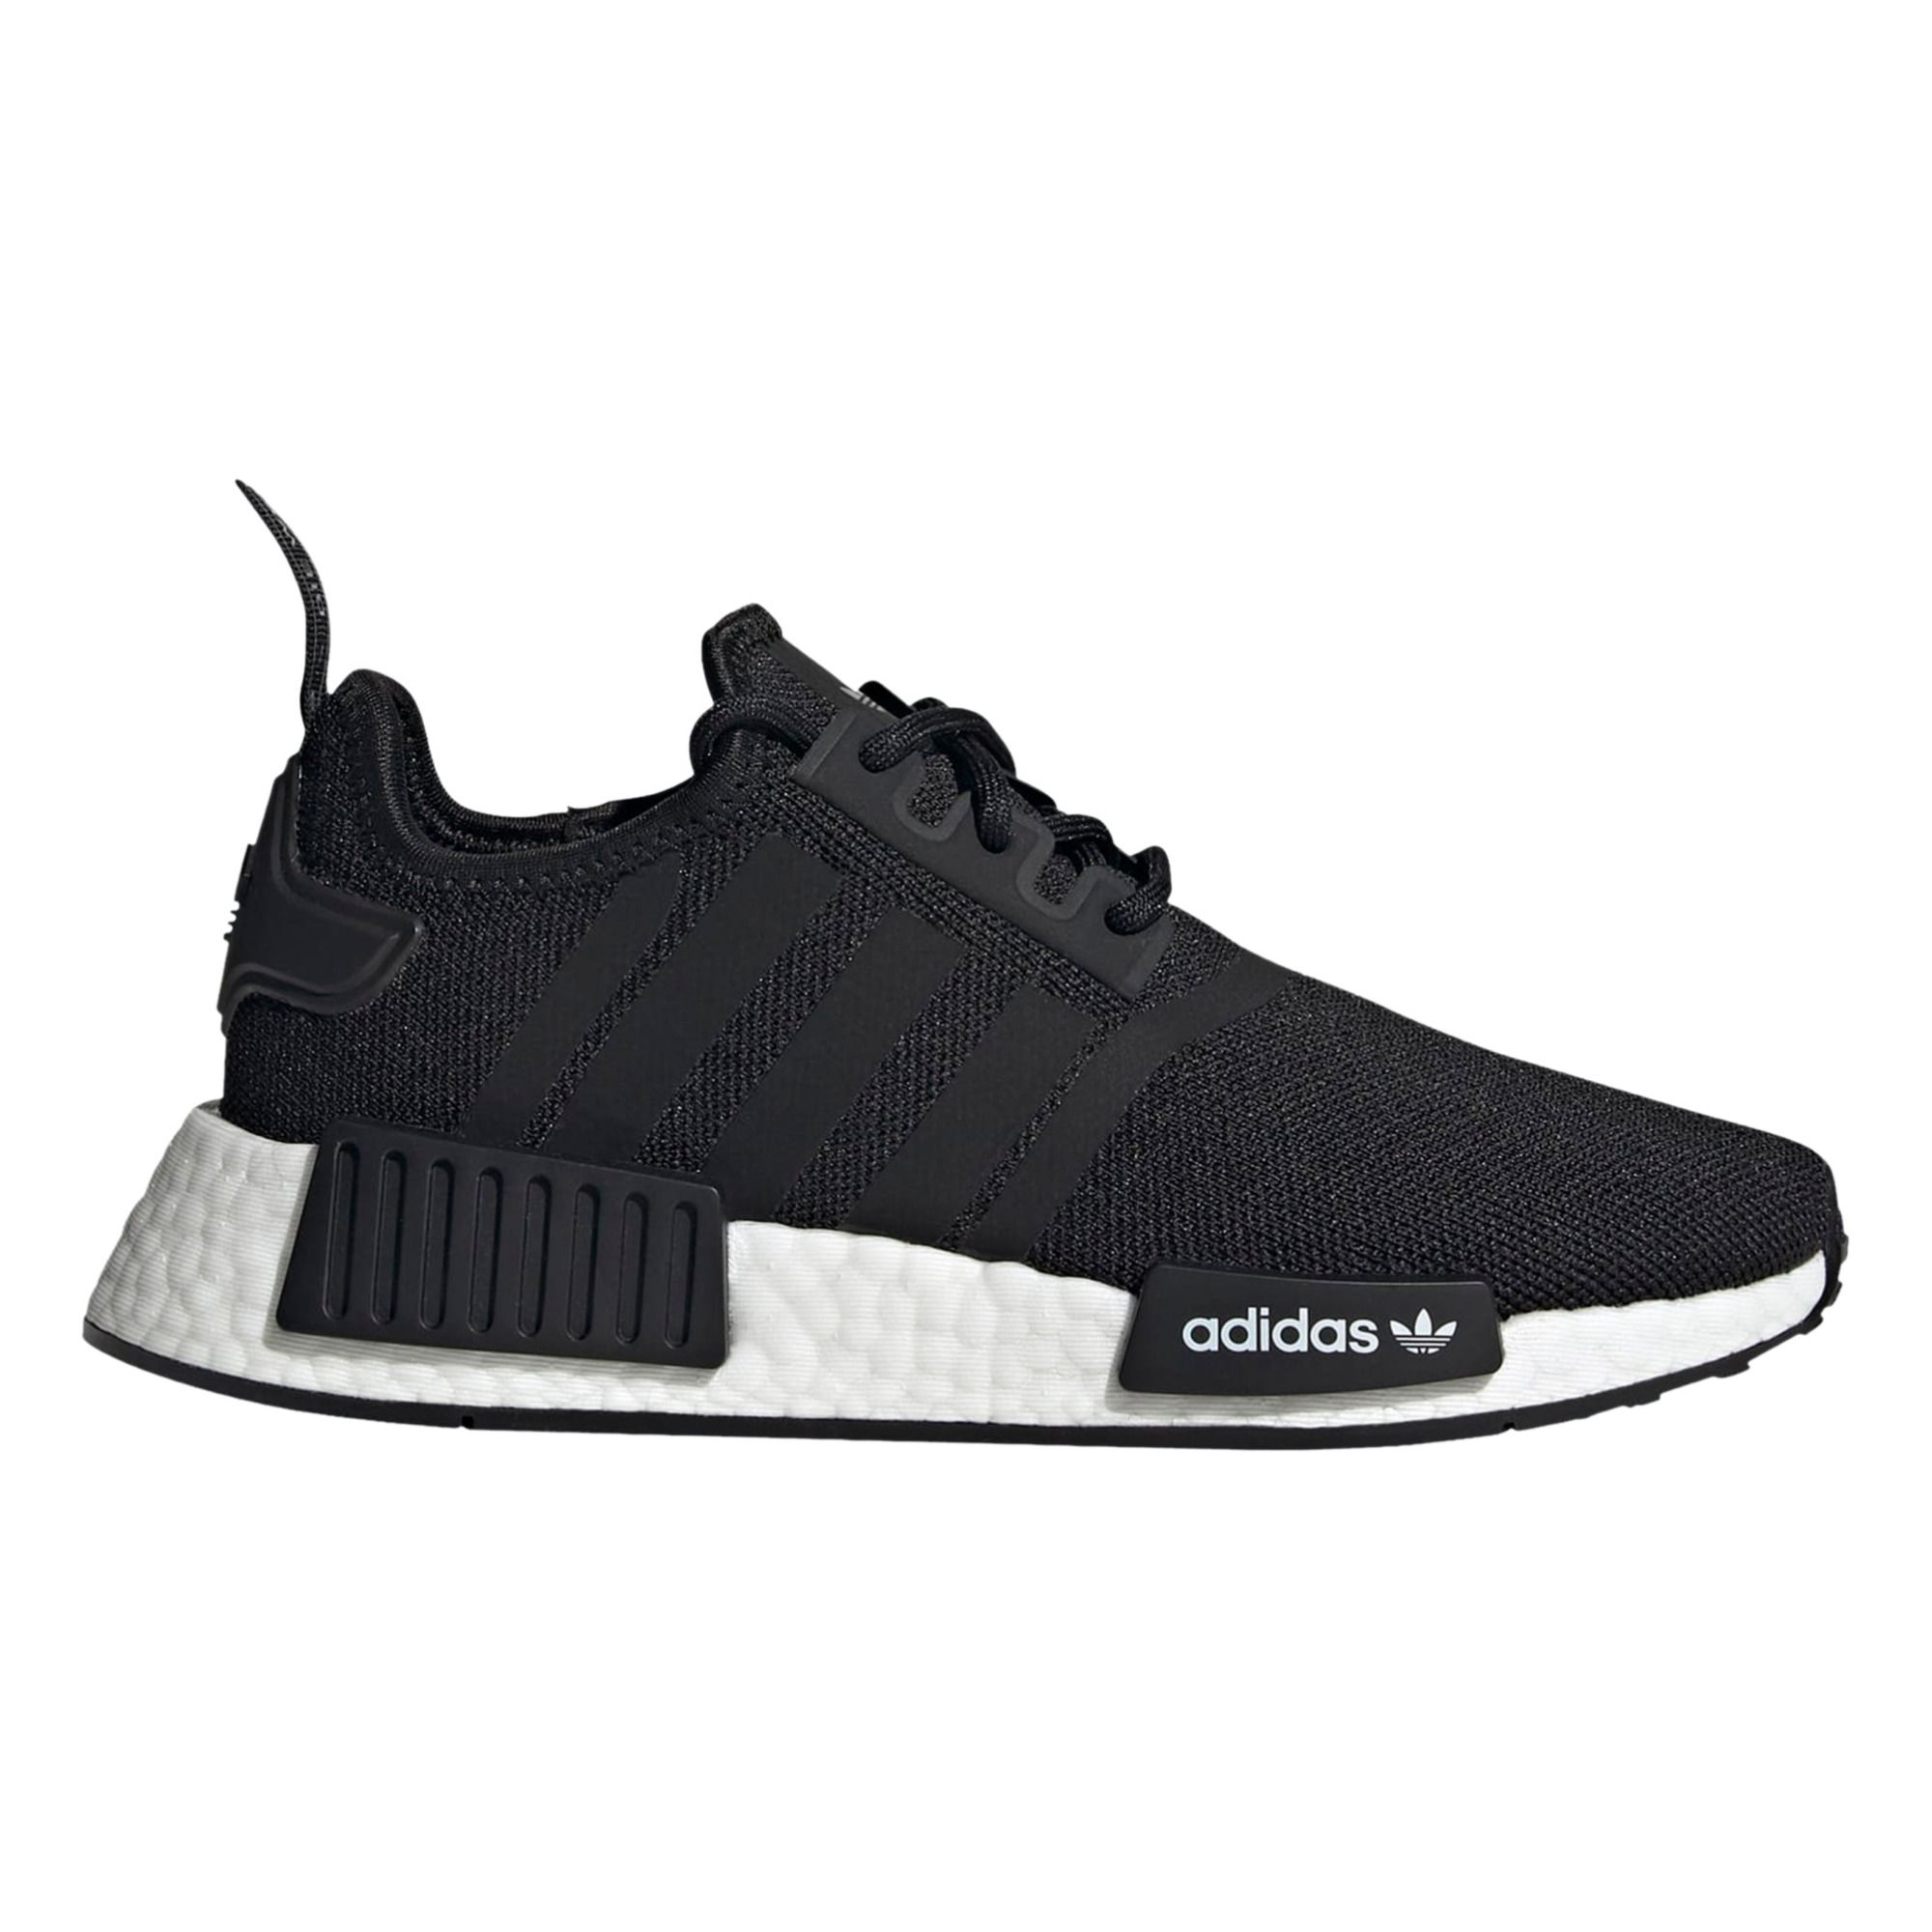 Adidas - Baskets Lacets NMD - Fille - Noir